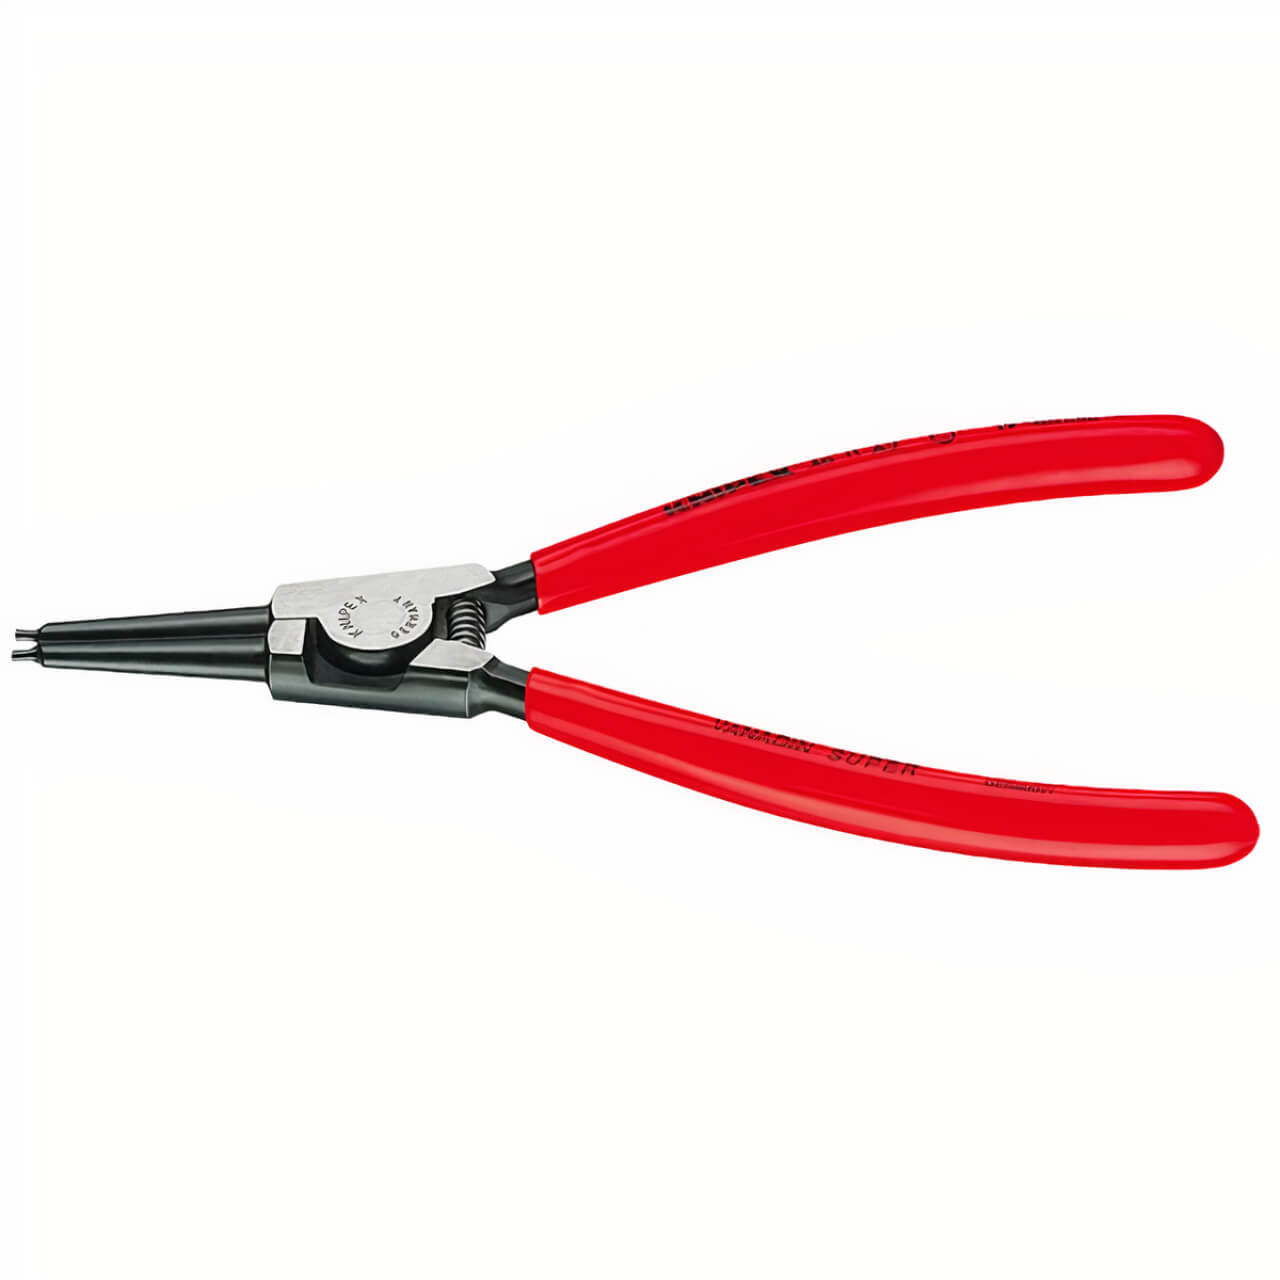 Knipex 210mm Straight Tip 40-150mm External Circlip Pliers